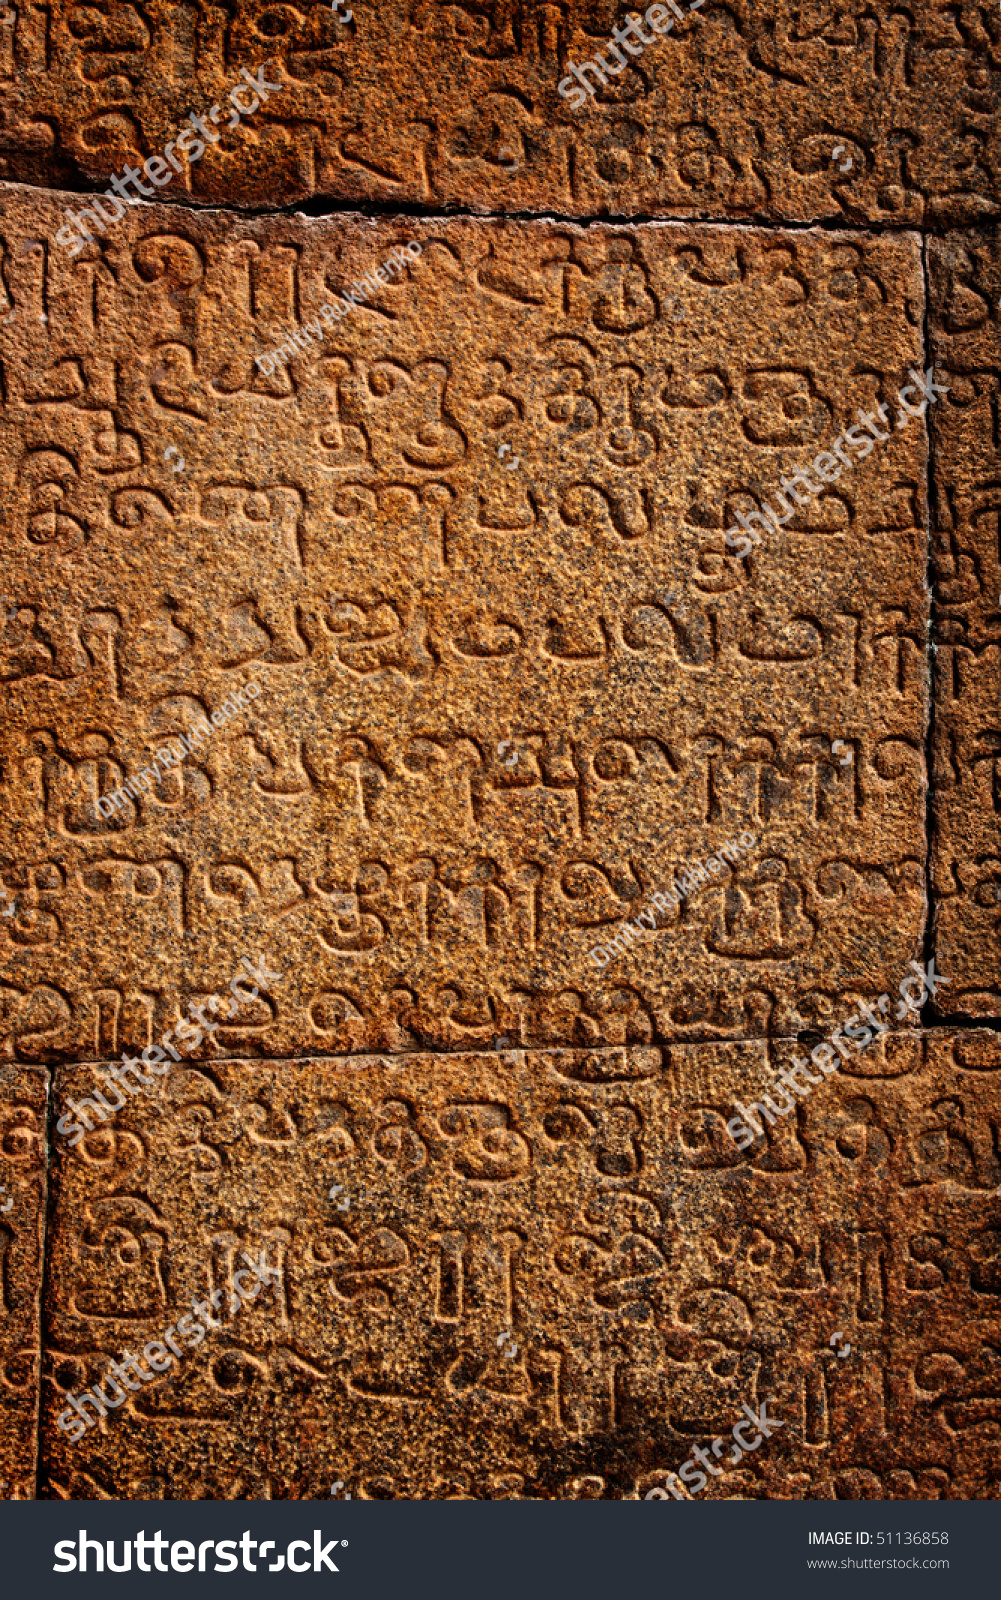 Ancient Inscriptions On Stone Wall In Tamil Language. India Stock Photo ...